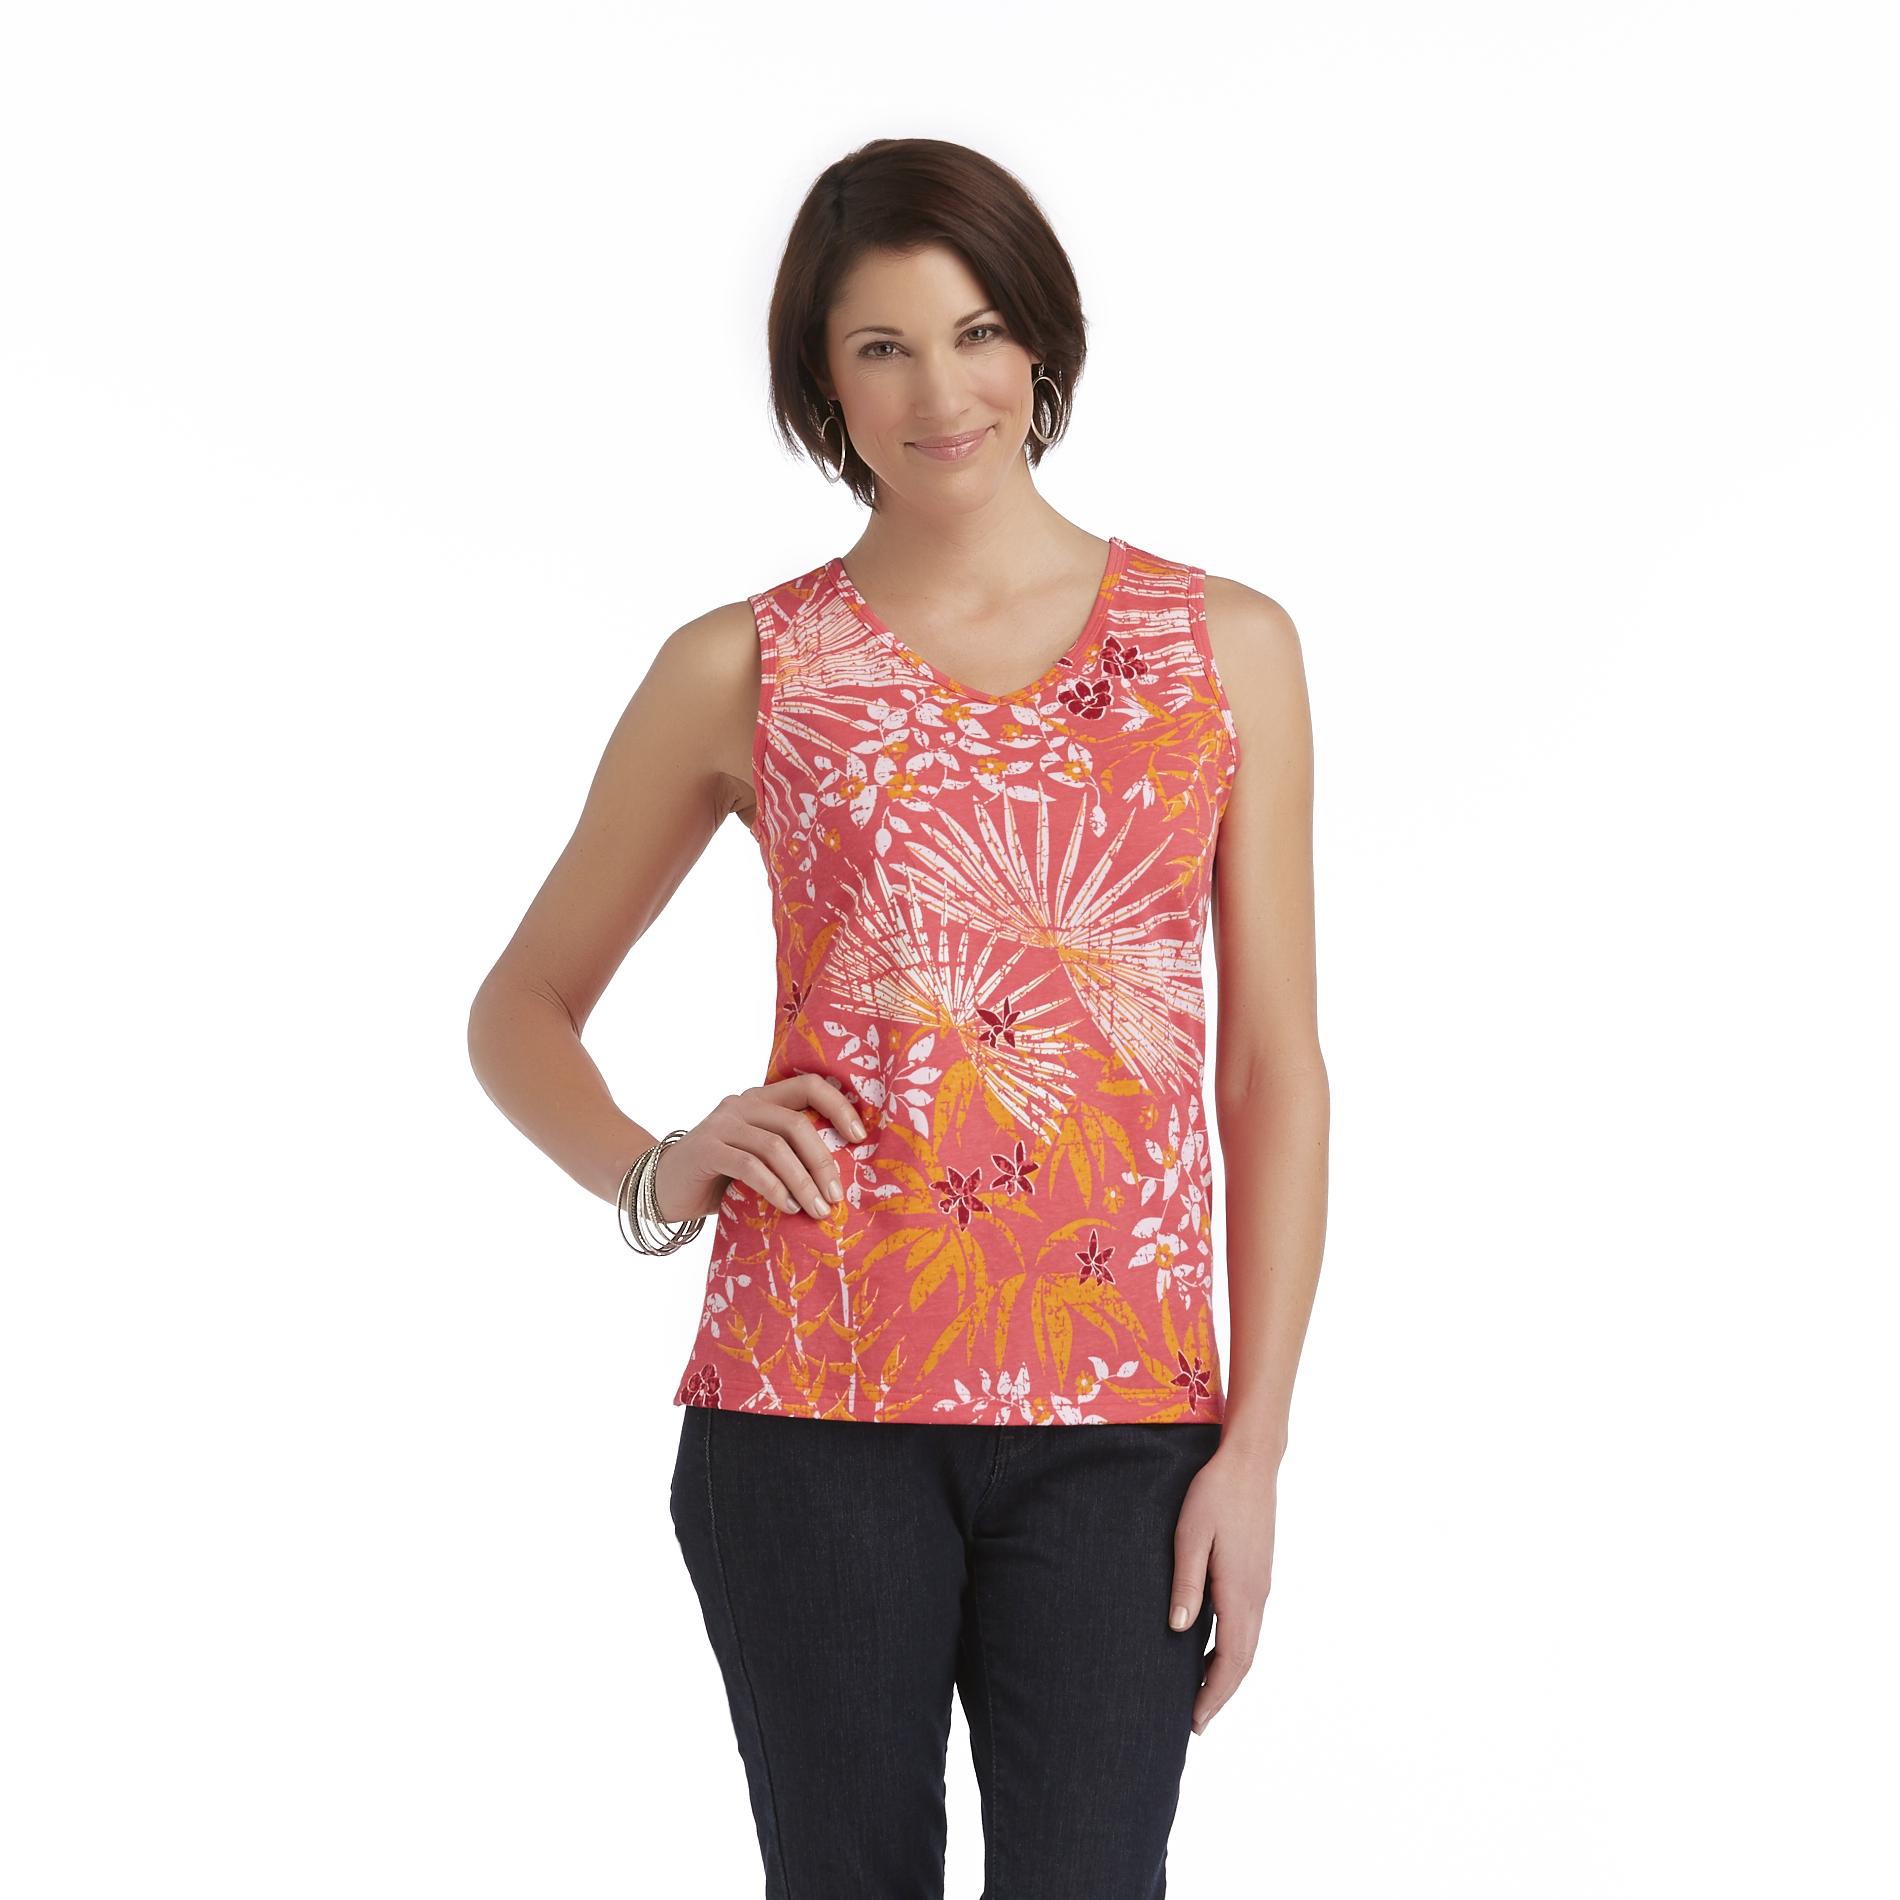 Basic Editions Women's V-Neck Tank Top - Floral